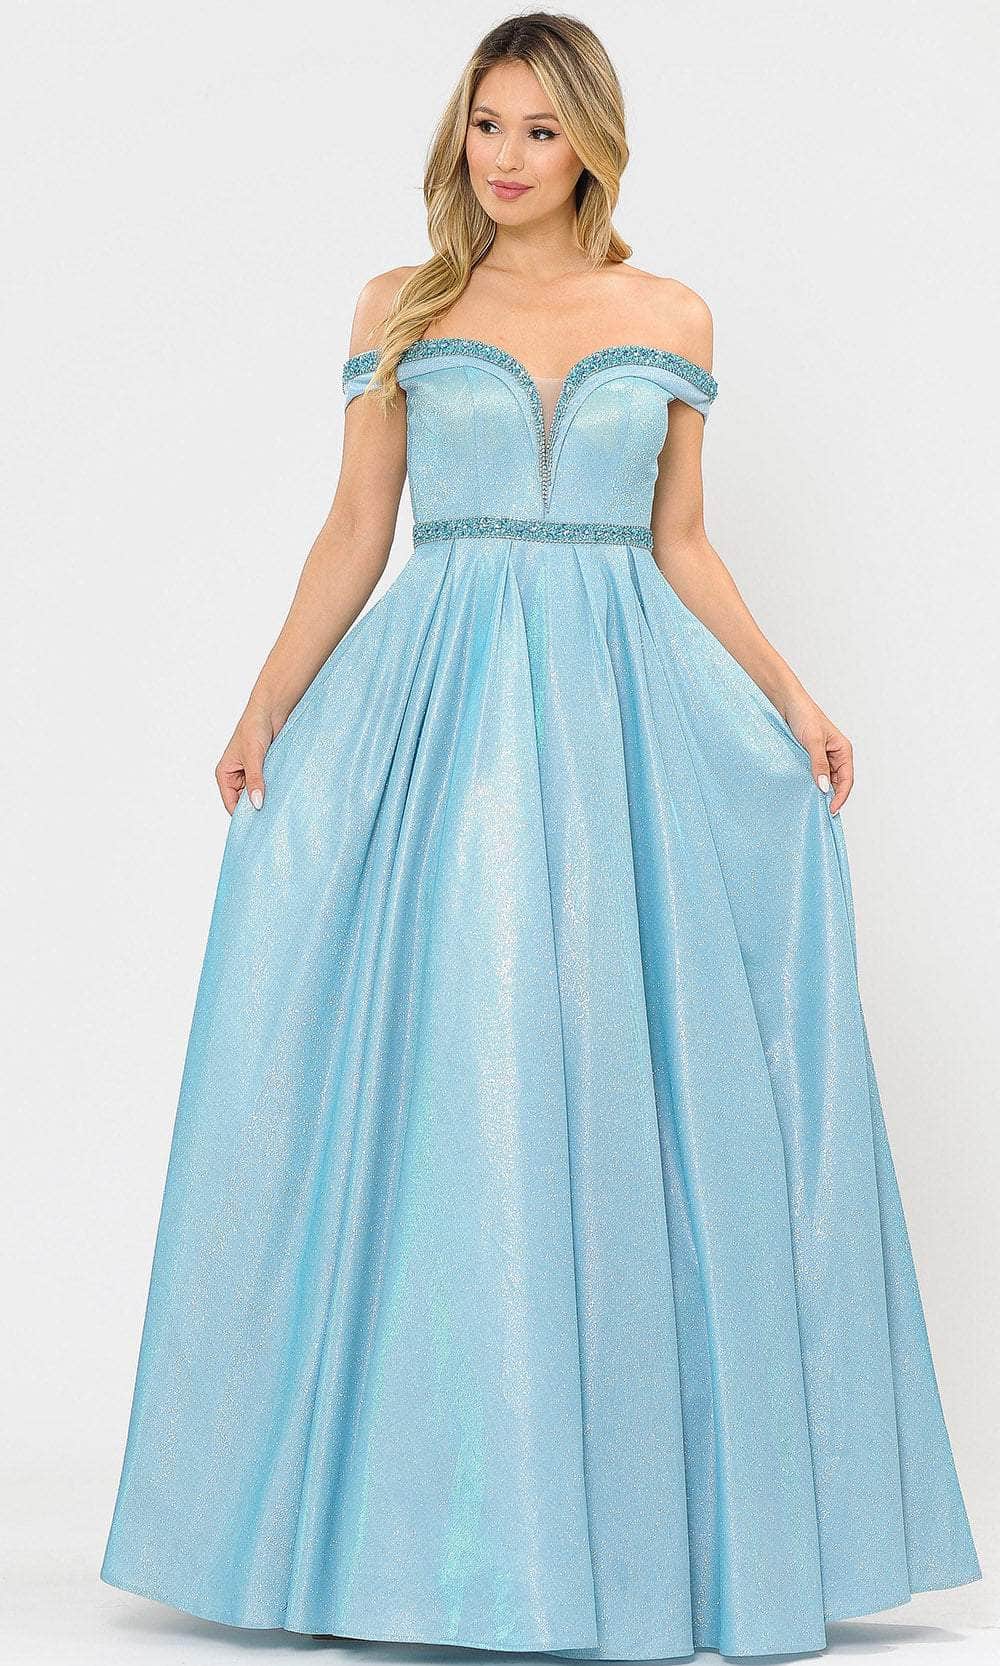 Image of Poly USA 8664 - Off-shoulder Sweetheart Neckline Long Gown